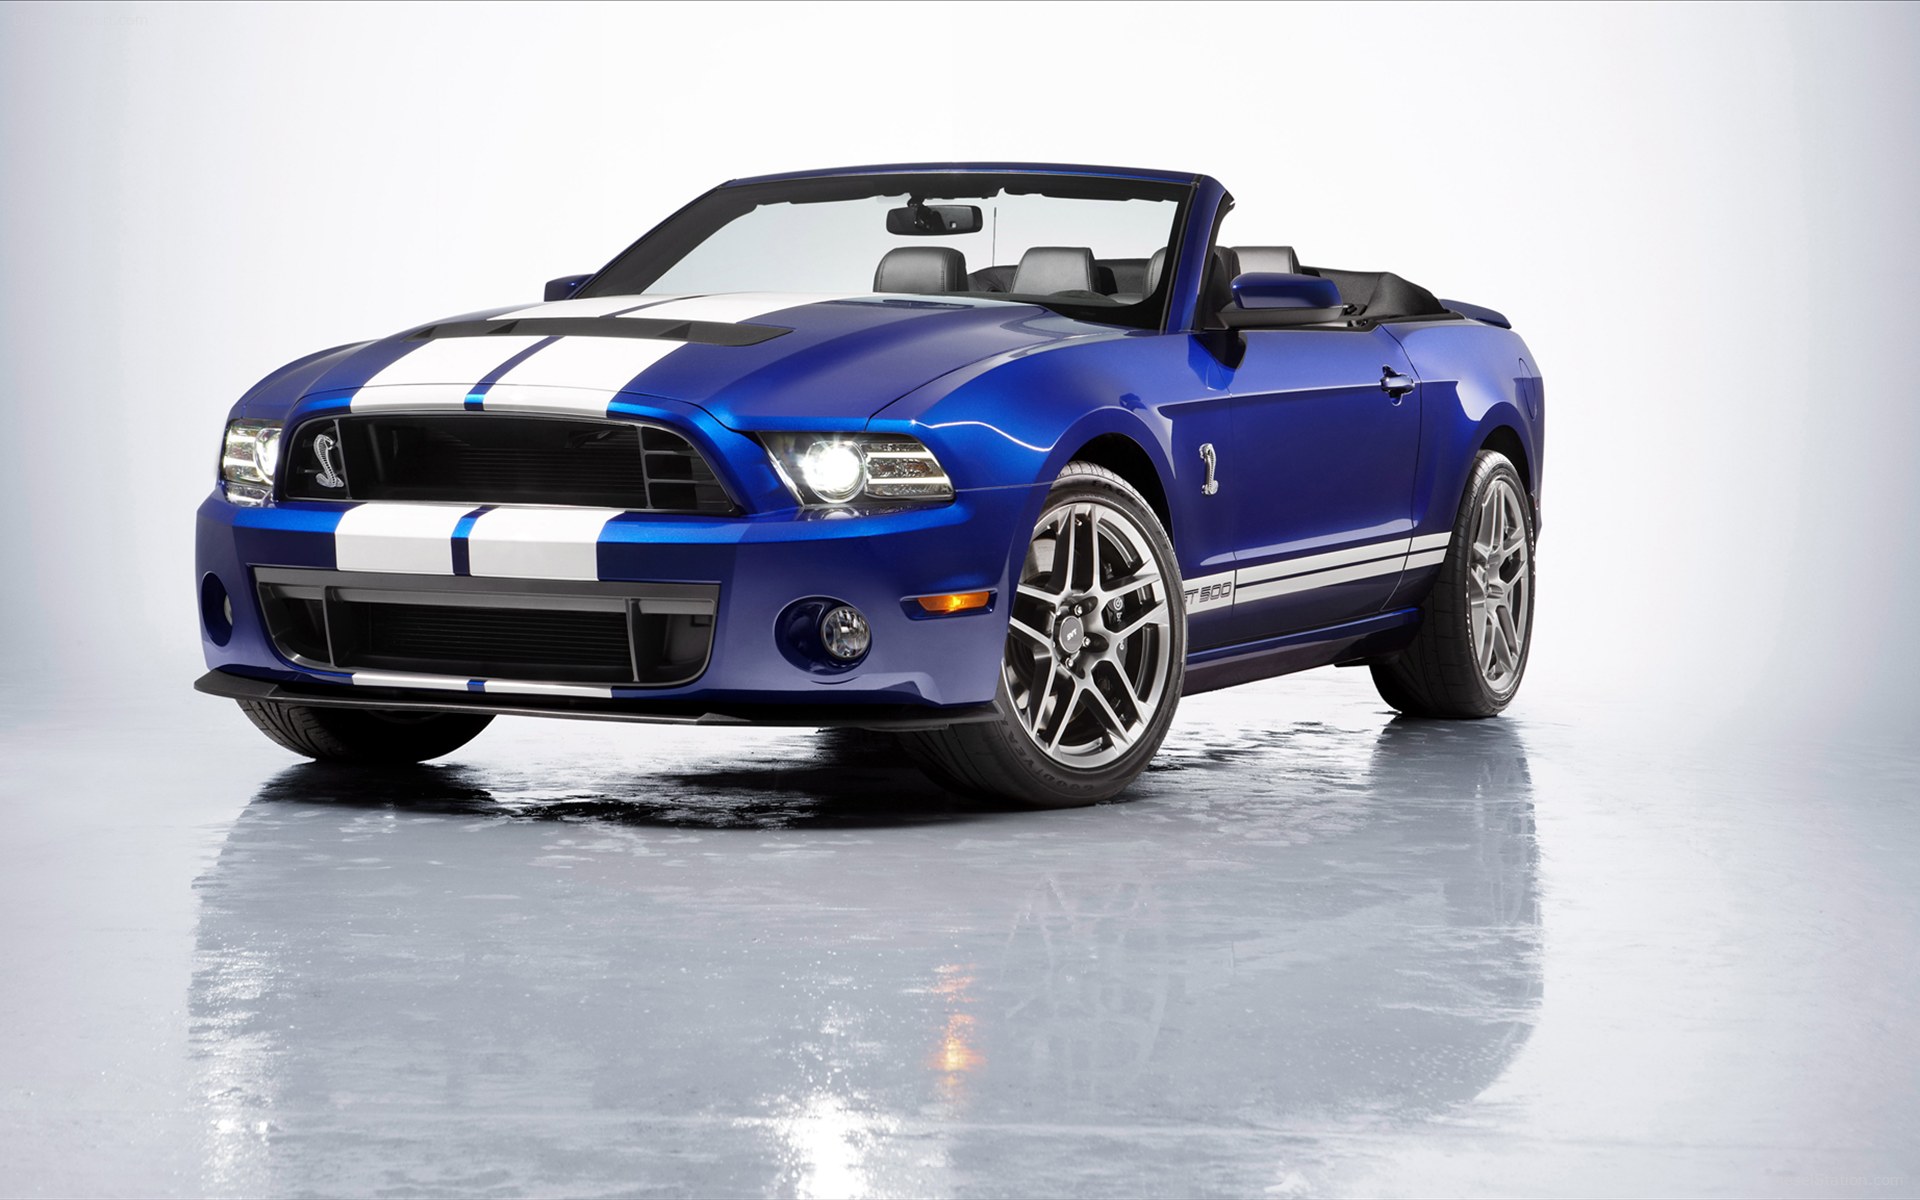 Ford Shelby Mustang Gt500 Convertible Wallpaper HD Car